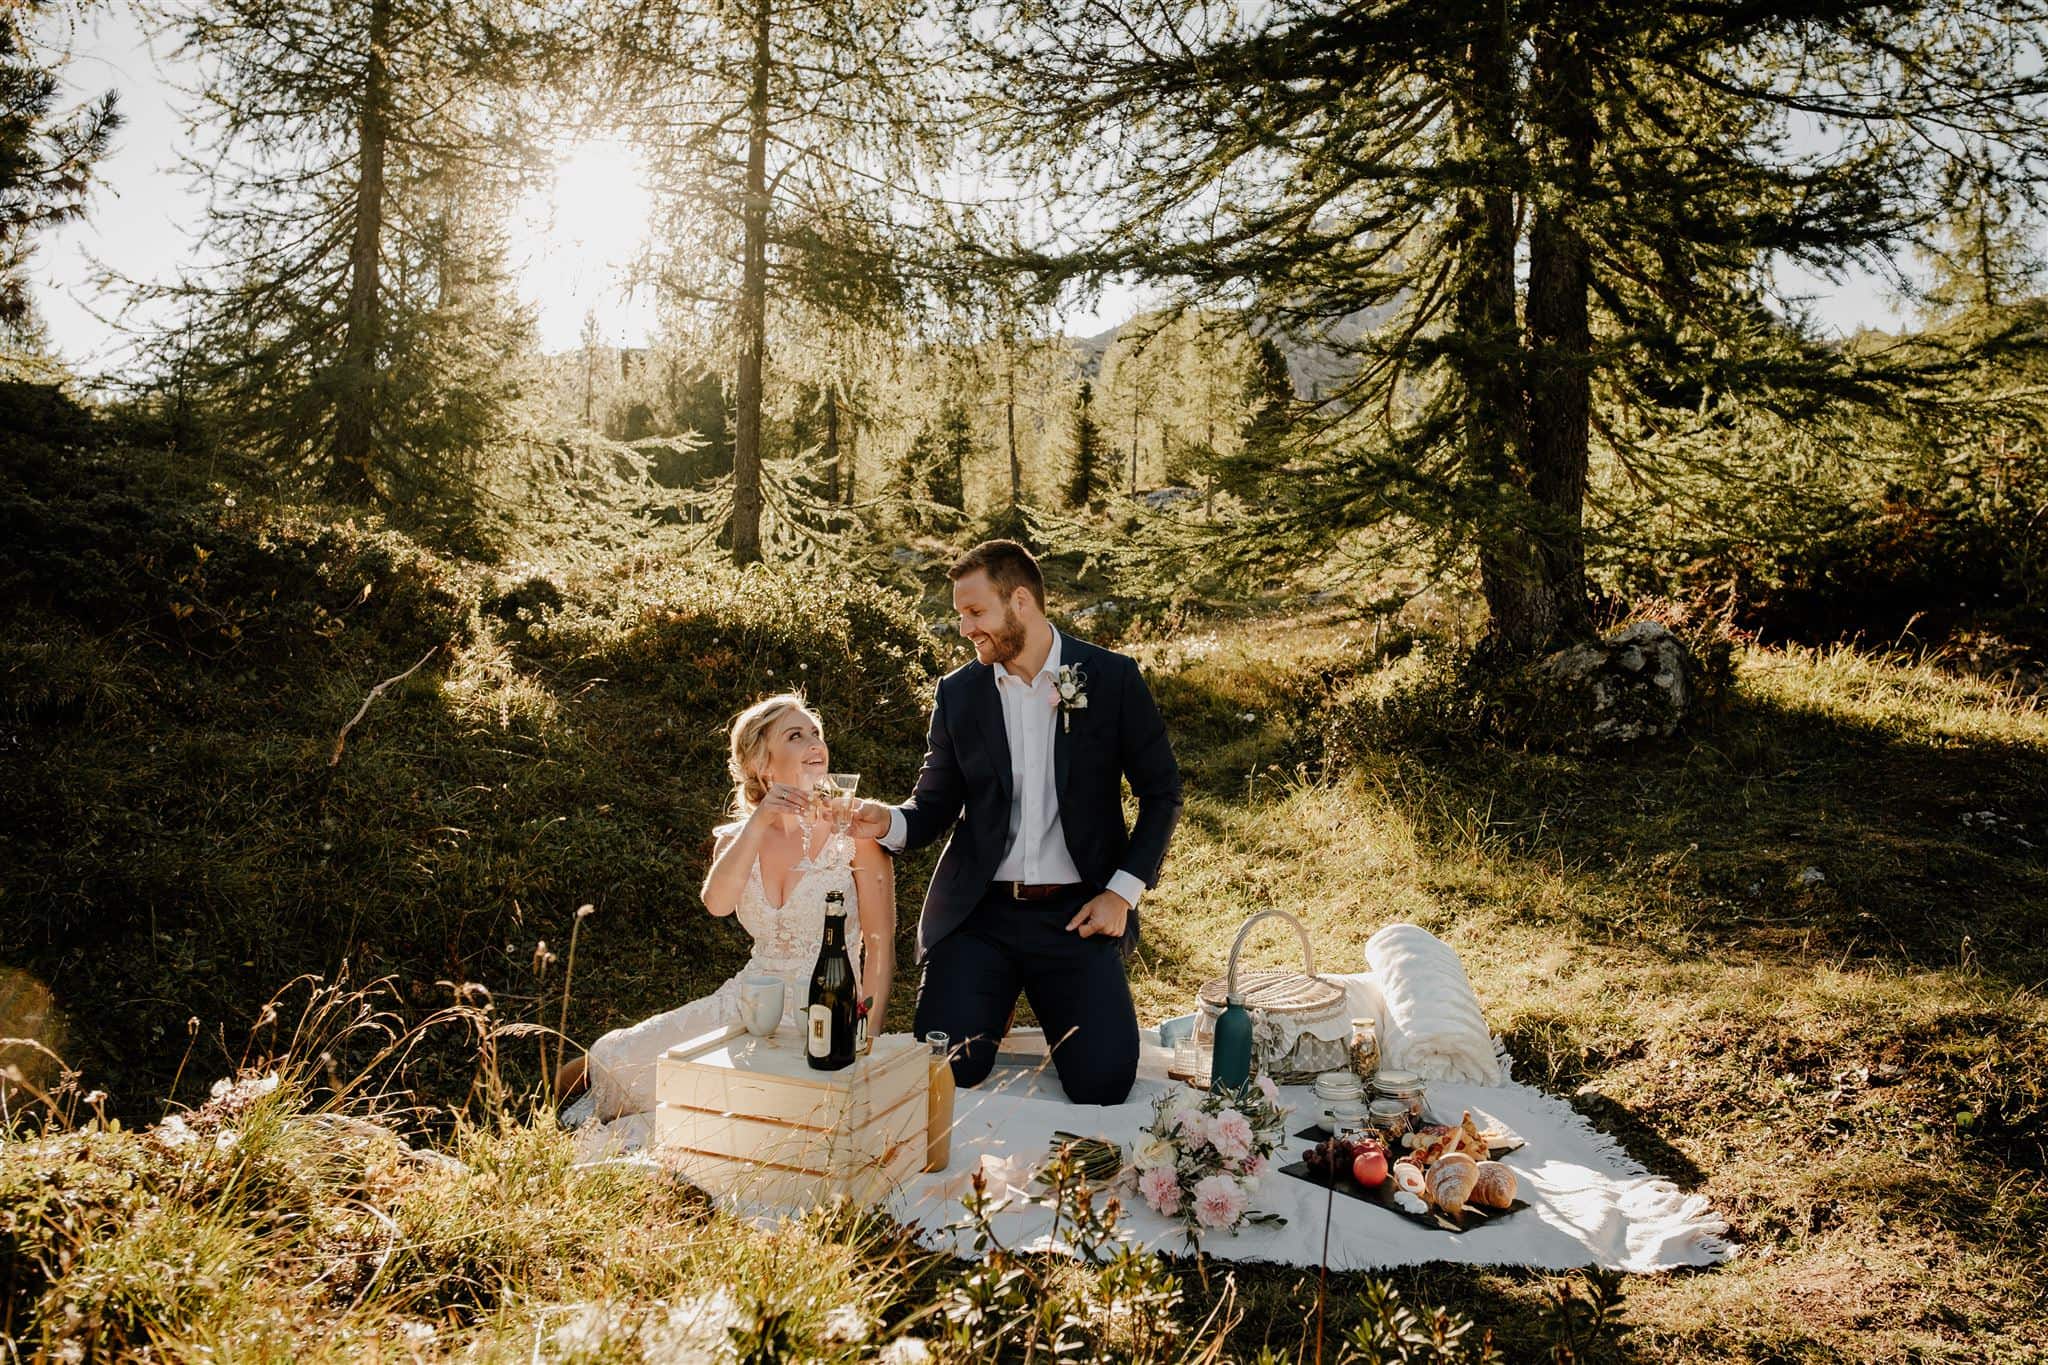 The Best Sustainable Wedding Dresses & Suits for Environmentally Conscious Couples